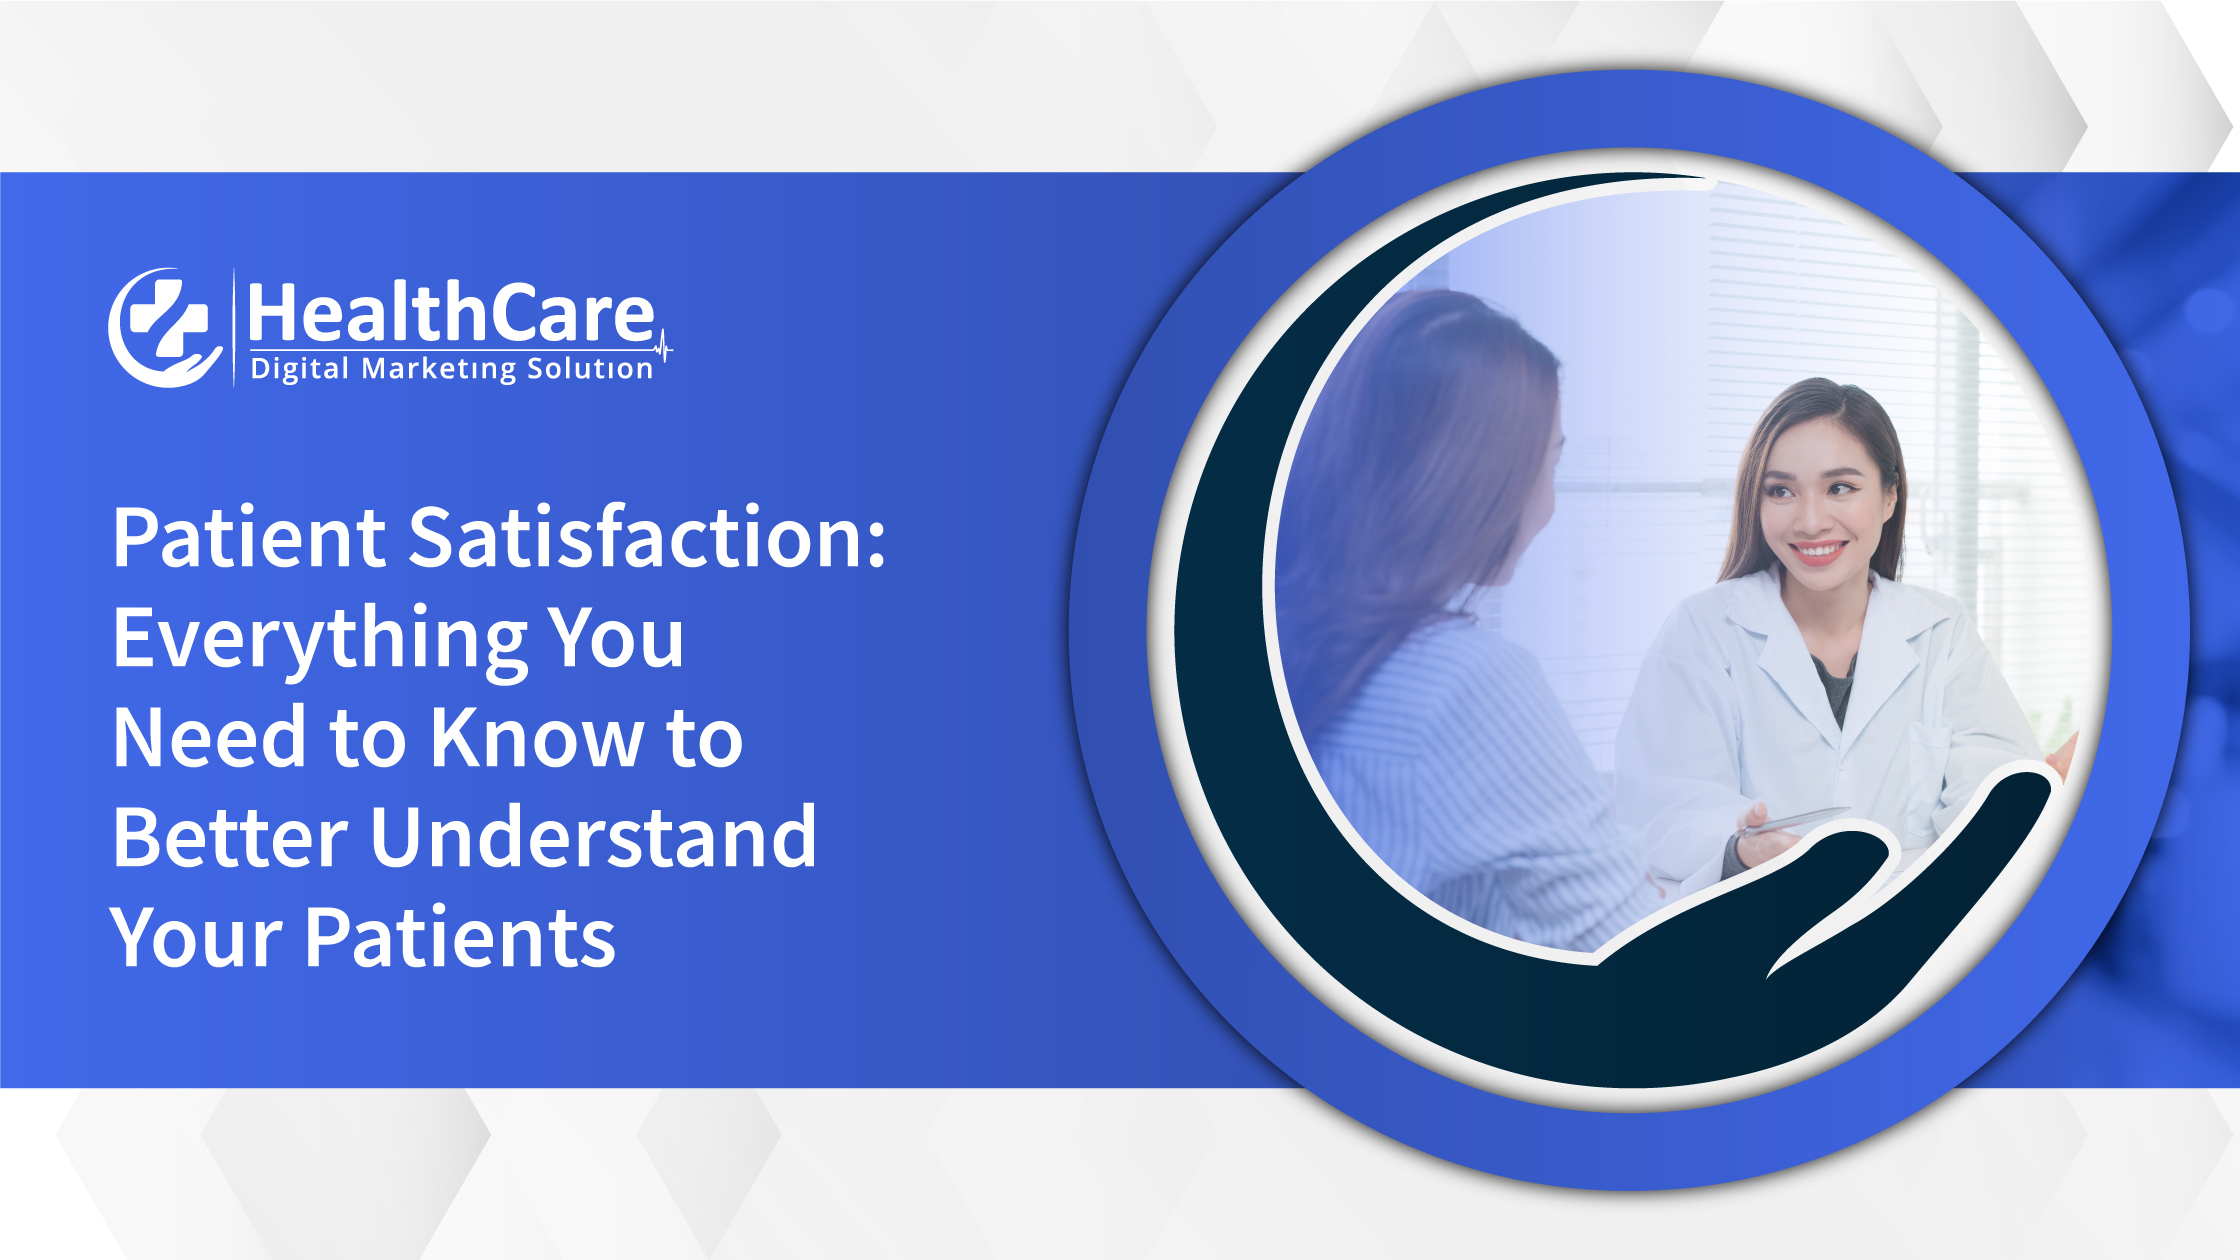 Patient Satisfaction: Everything You Need to Know to Better Understand Your Patients